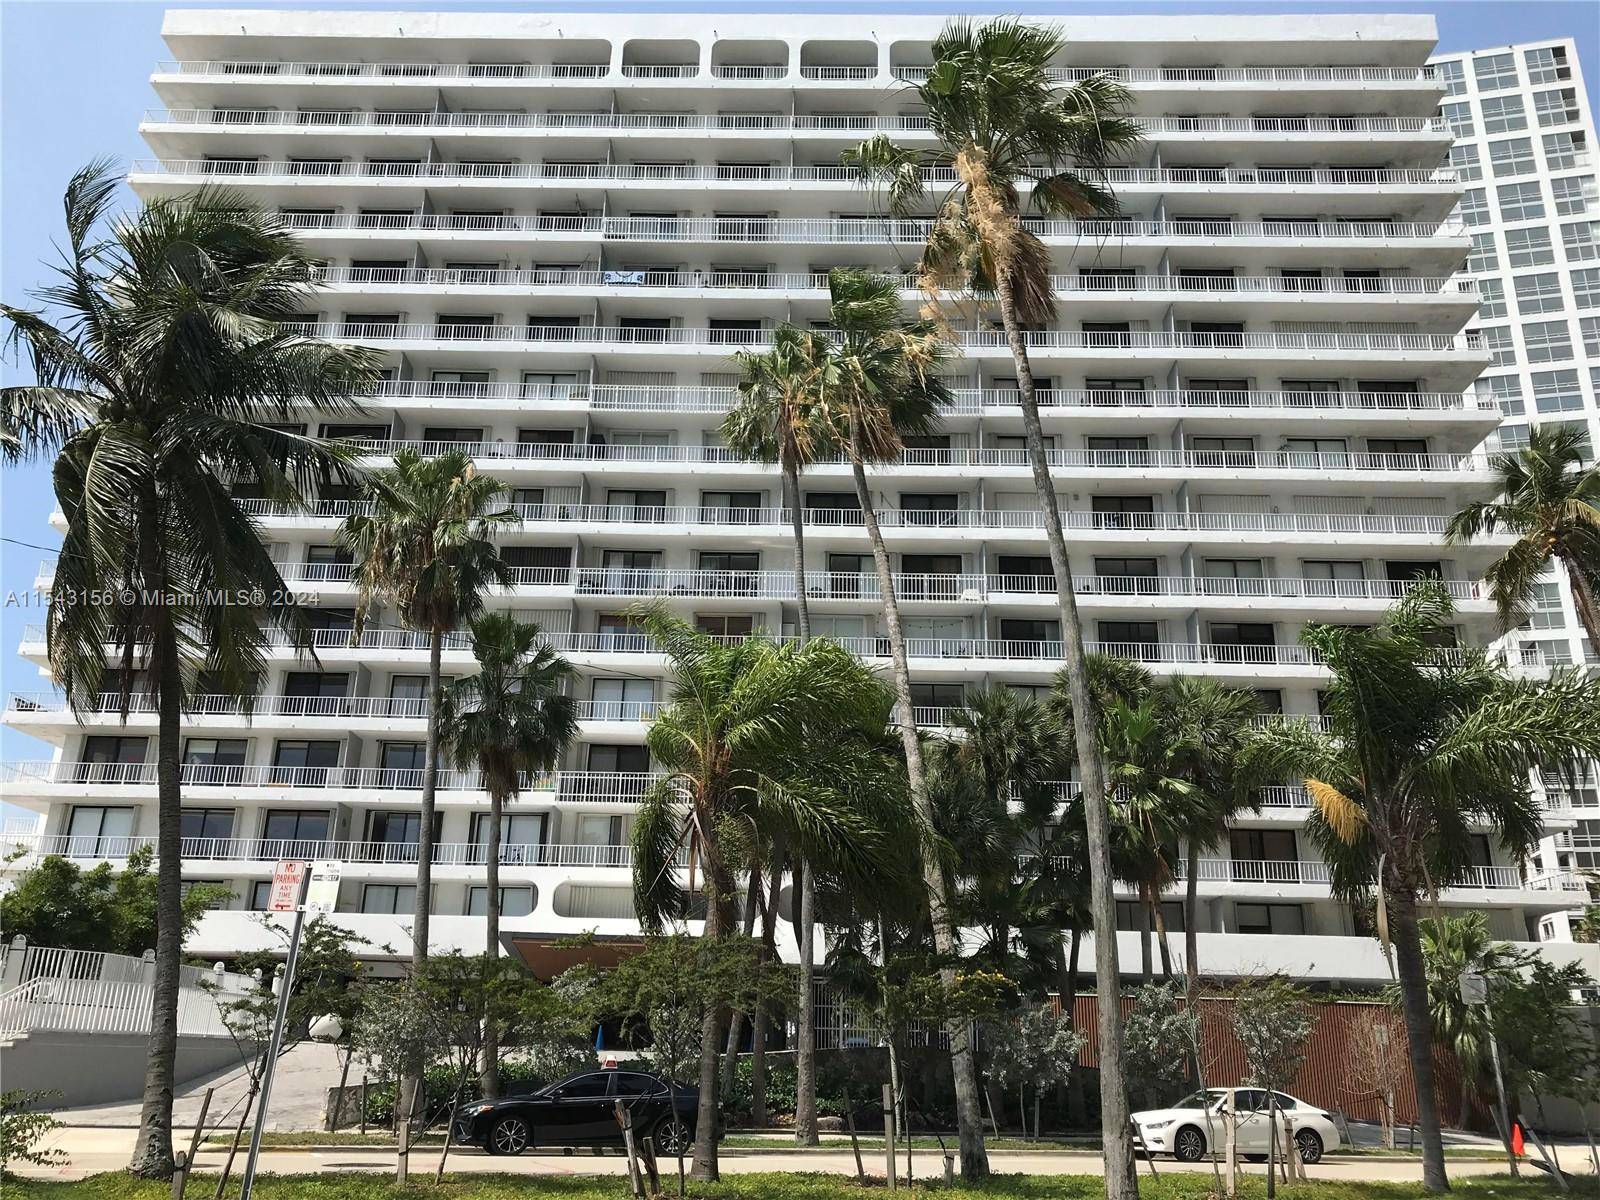 Beautiful furnished apartment, completely renewed, with Bay view, located in a quiet area 3 minutes away of I 95, close to supermarkets, shopping centers, financial institutions, restaurants.